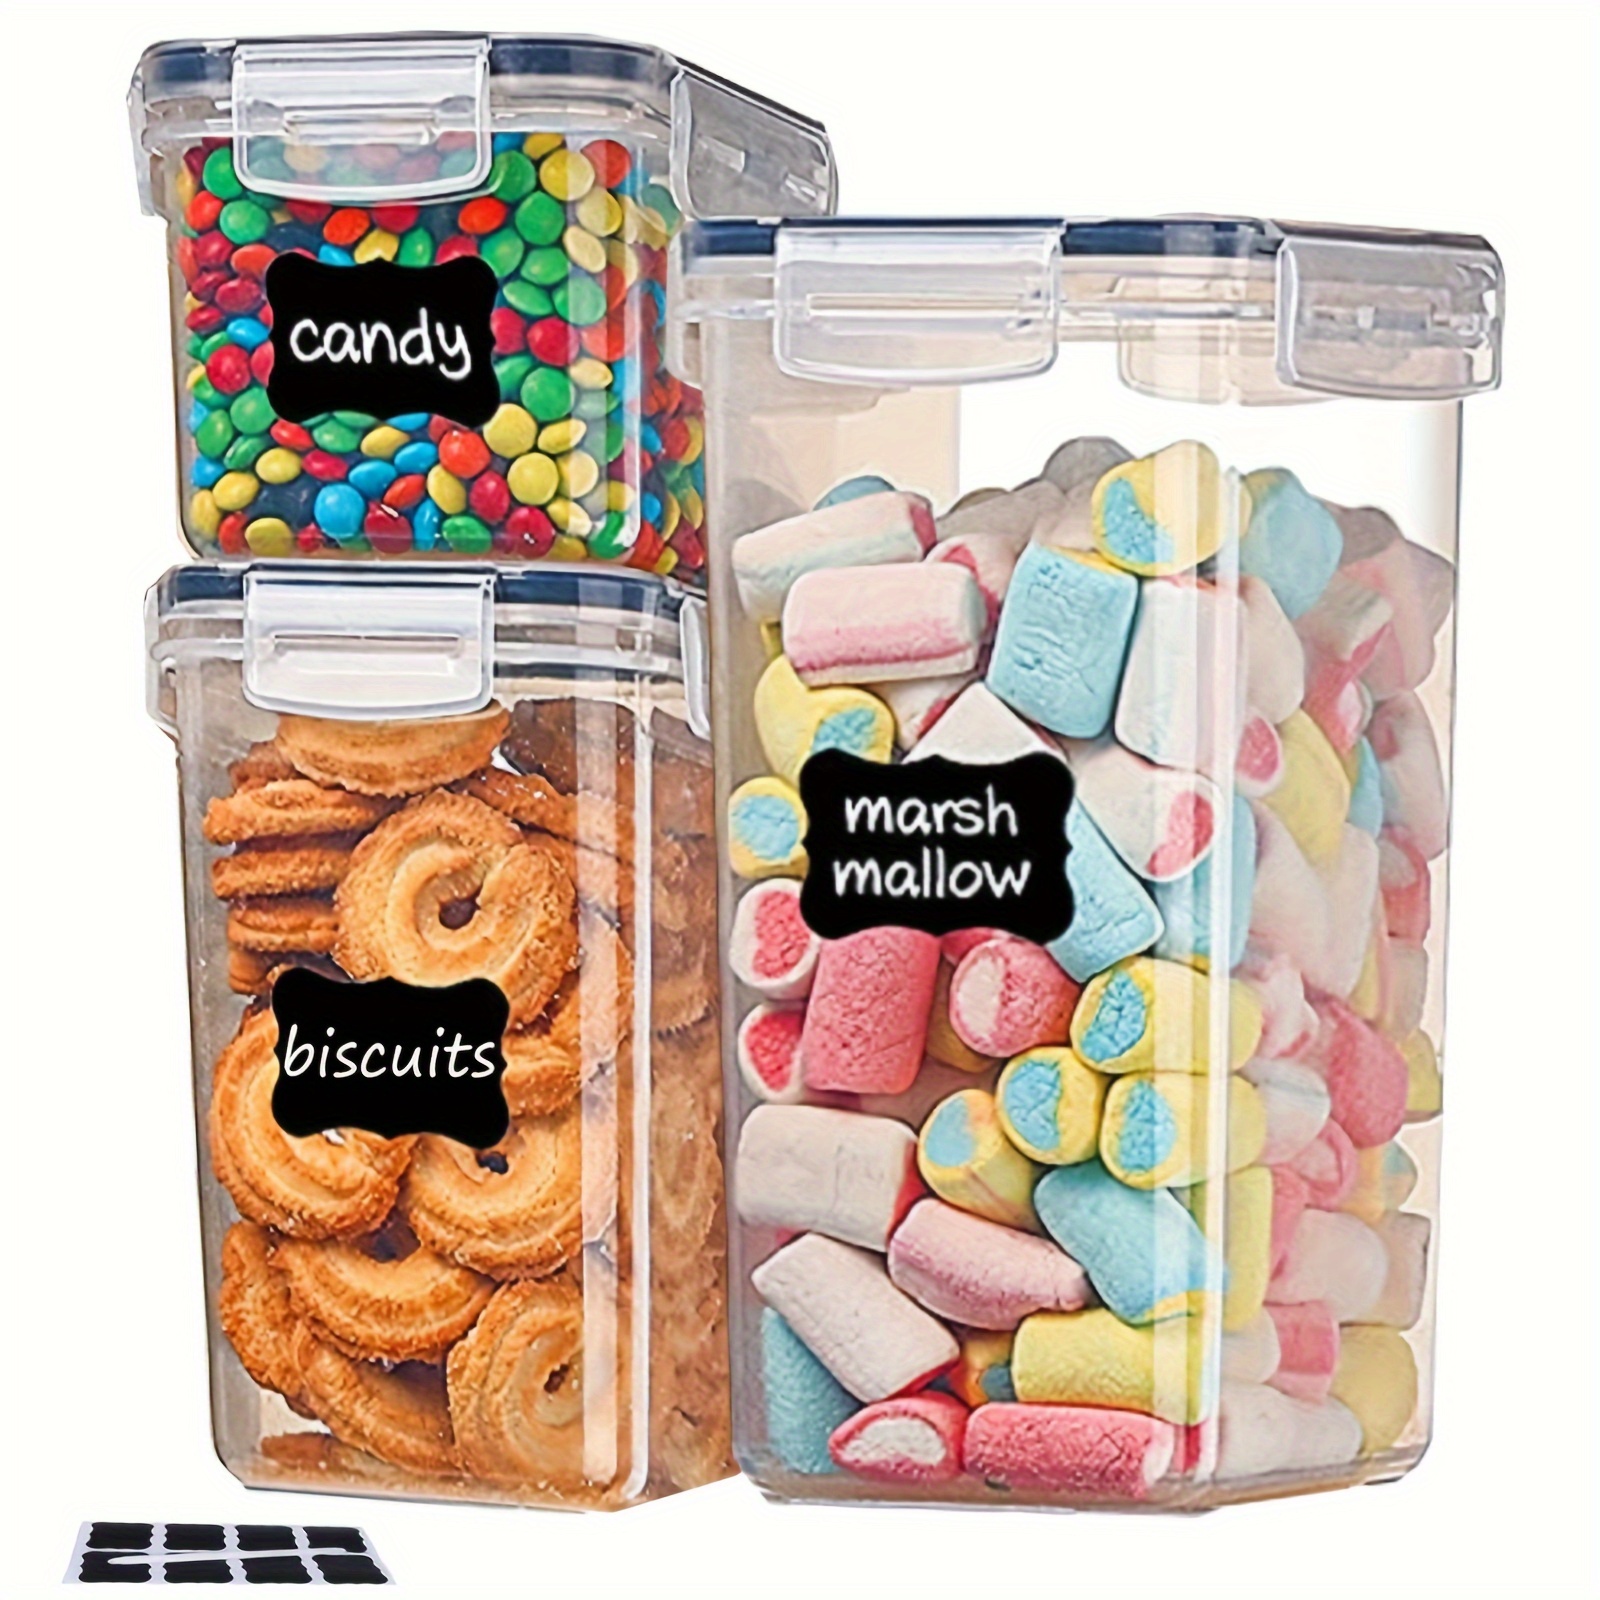 Cereal Containers Storage 2 to 6 Pack Airtight Food Storage Containers